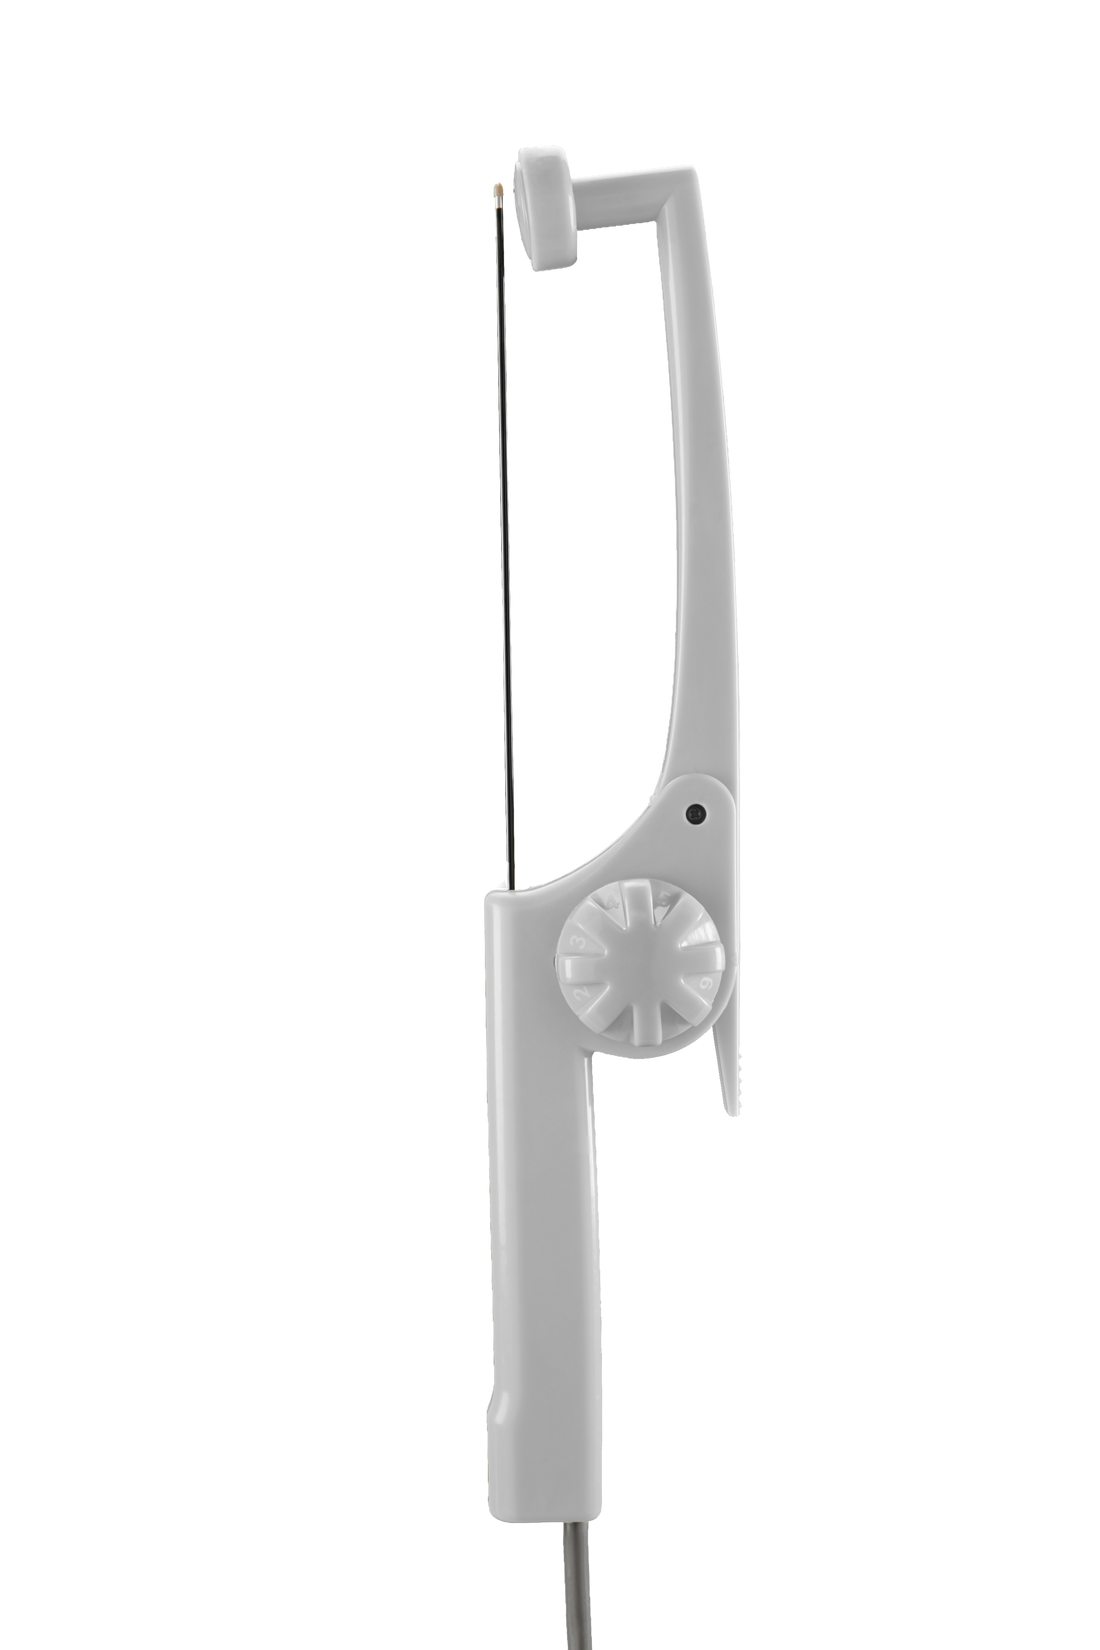 The image shows a white, handheld BodyTite Hand Piece designed to hold dental floss taut for easy flossing. With a long handle for grip and a small wheel for adjusting the floss tension, its minimally invasive design ensures effective and effortless oral care.